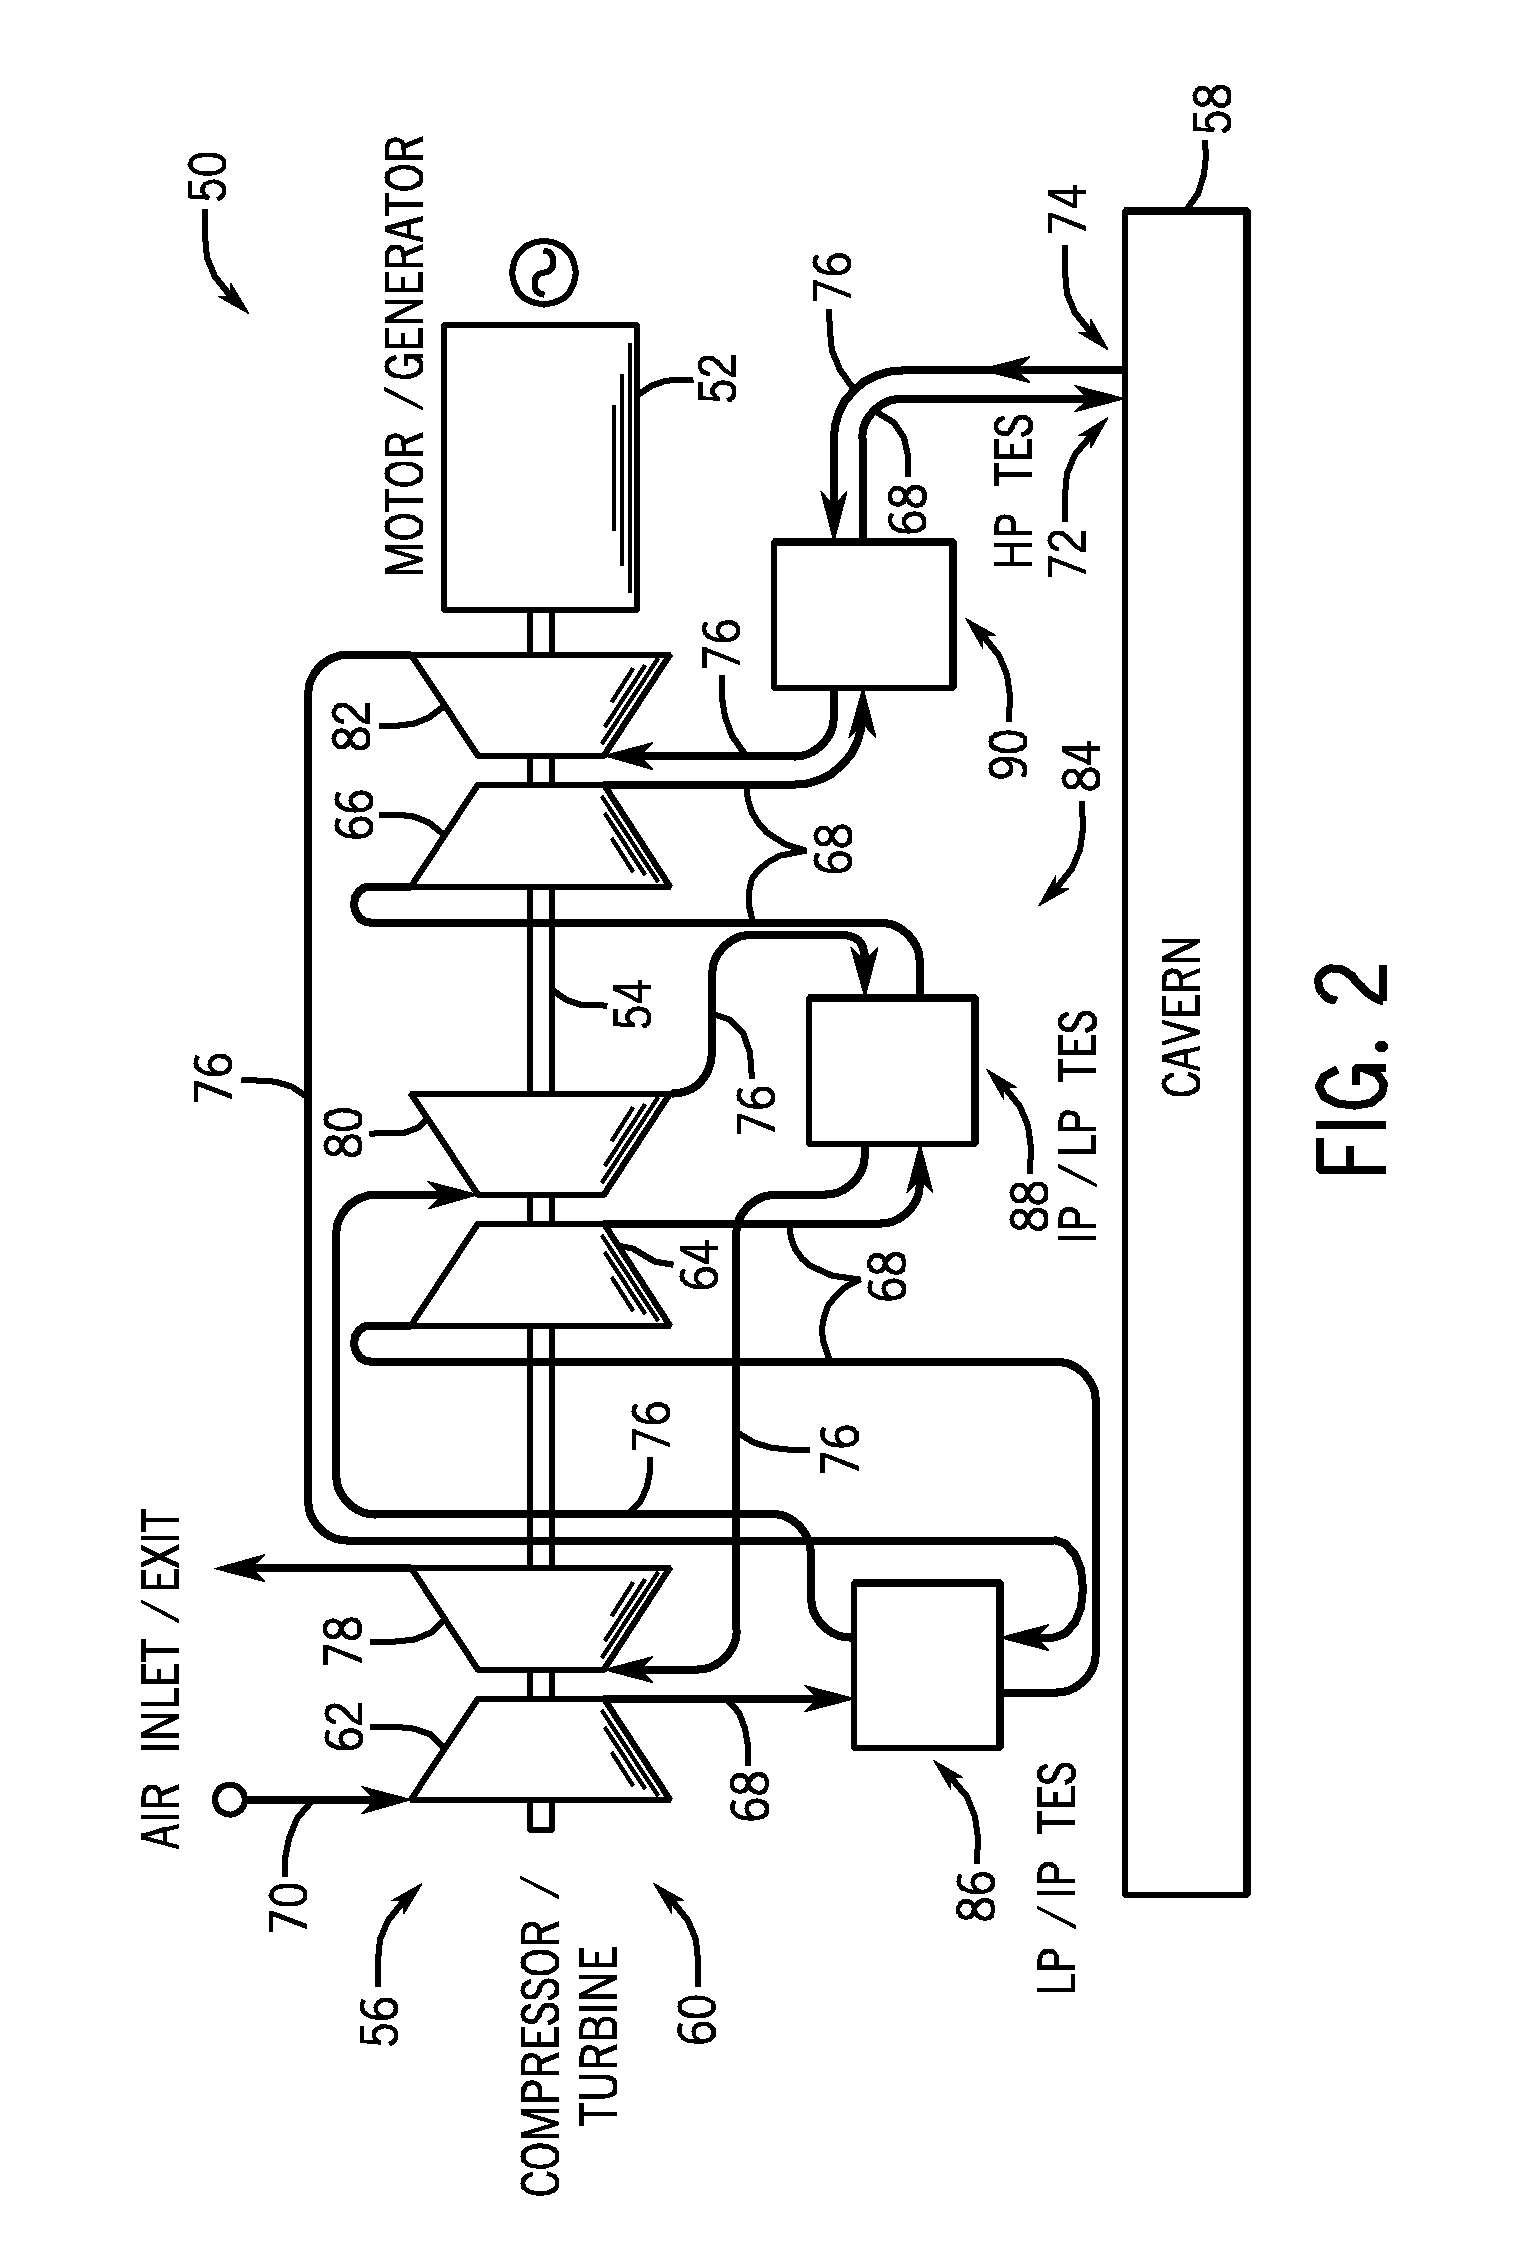 Adiabatic compressed air energy storage system with multi-stage thermal energy storage